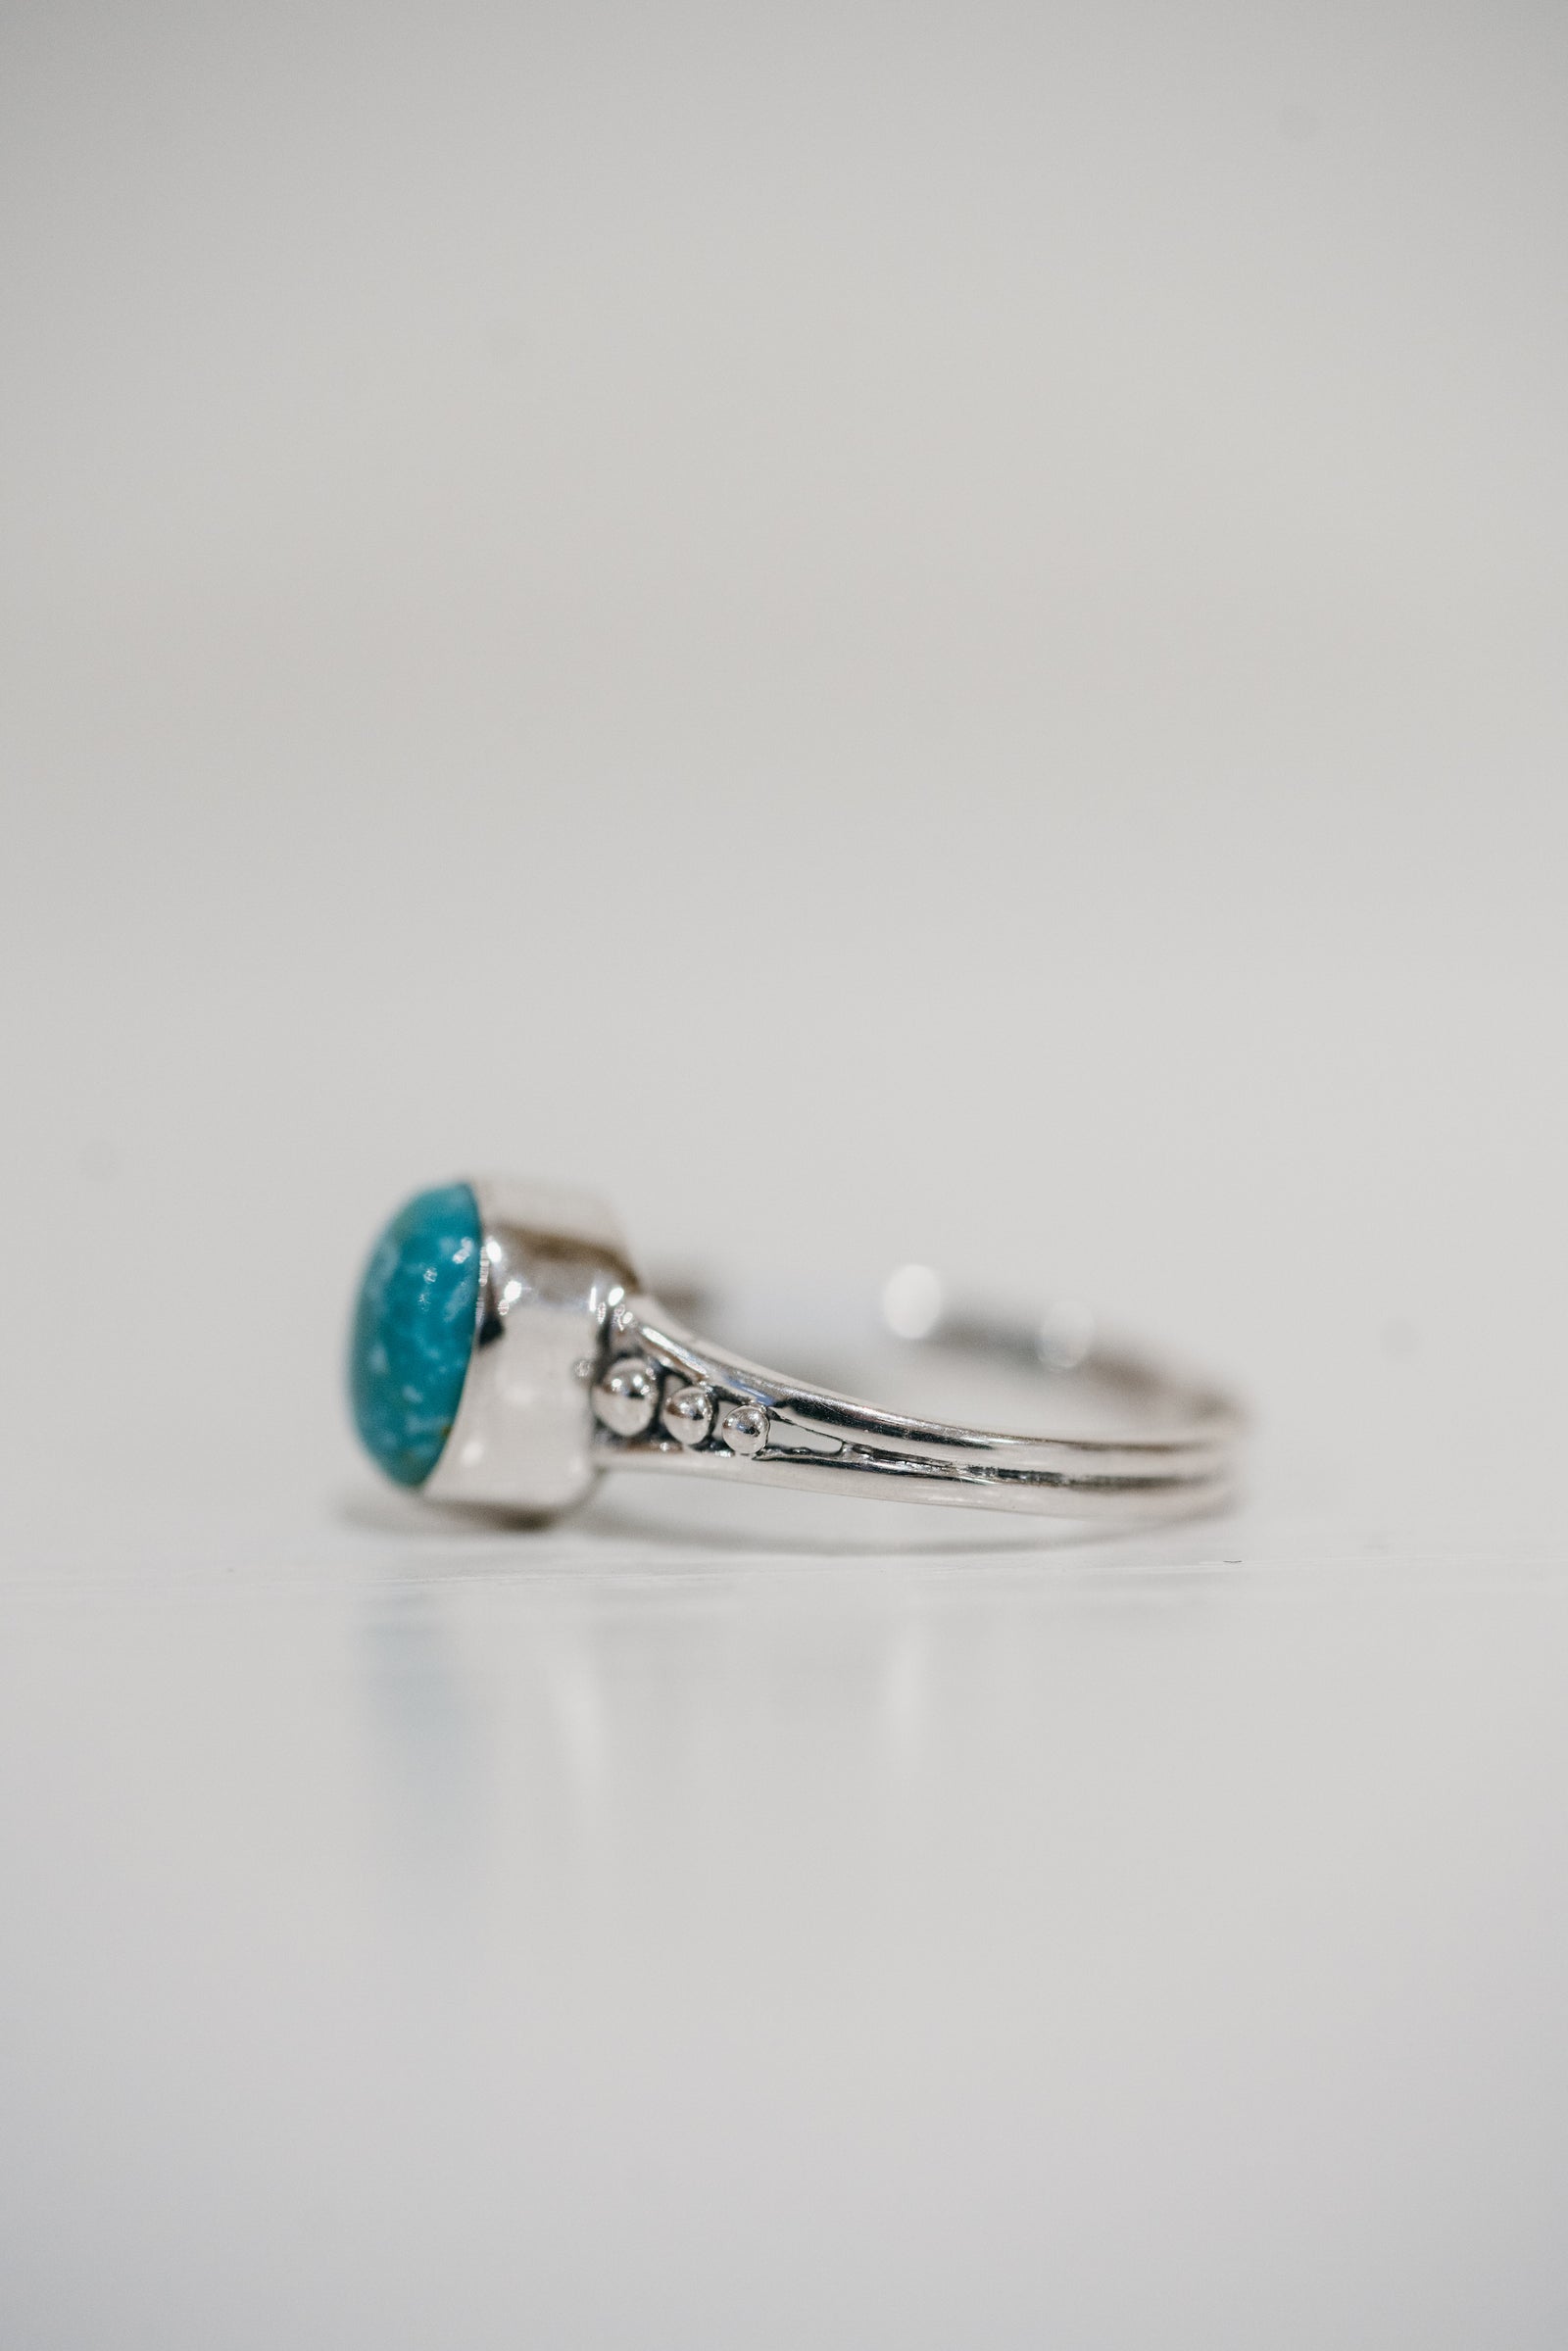 Stassie Ring | Mexican Turquoise